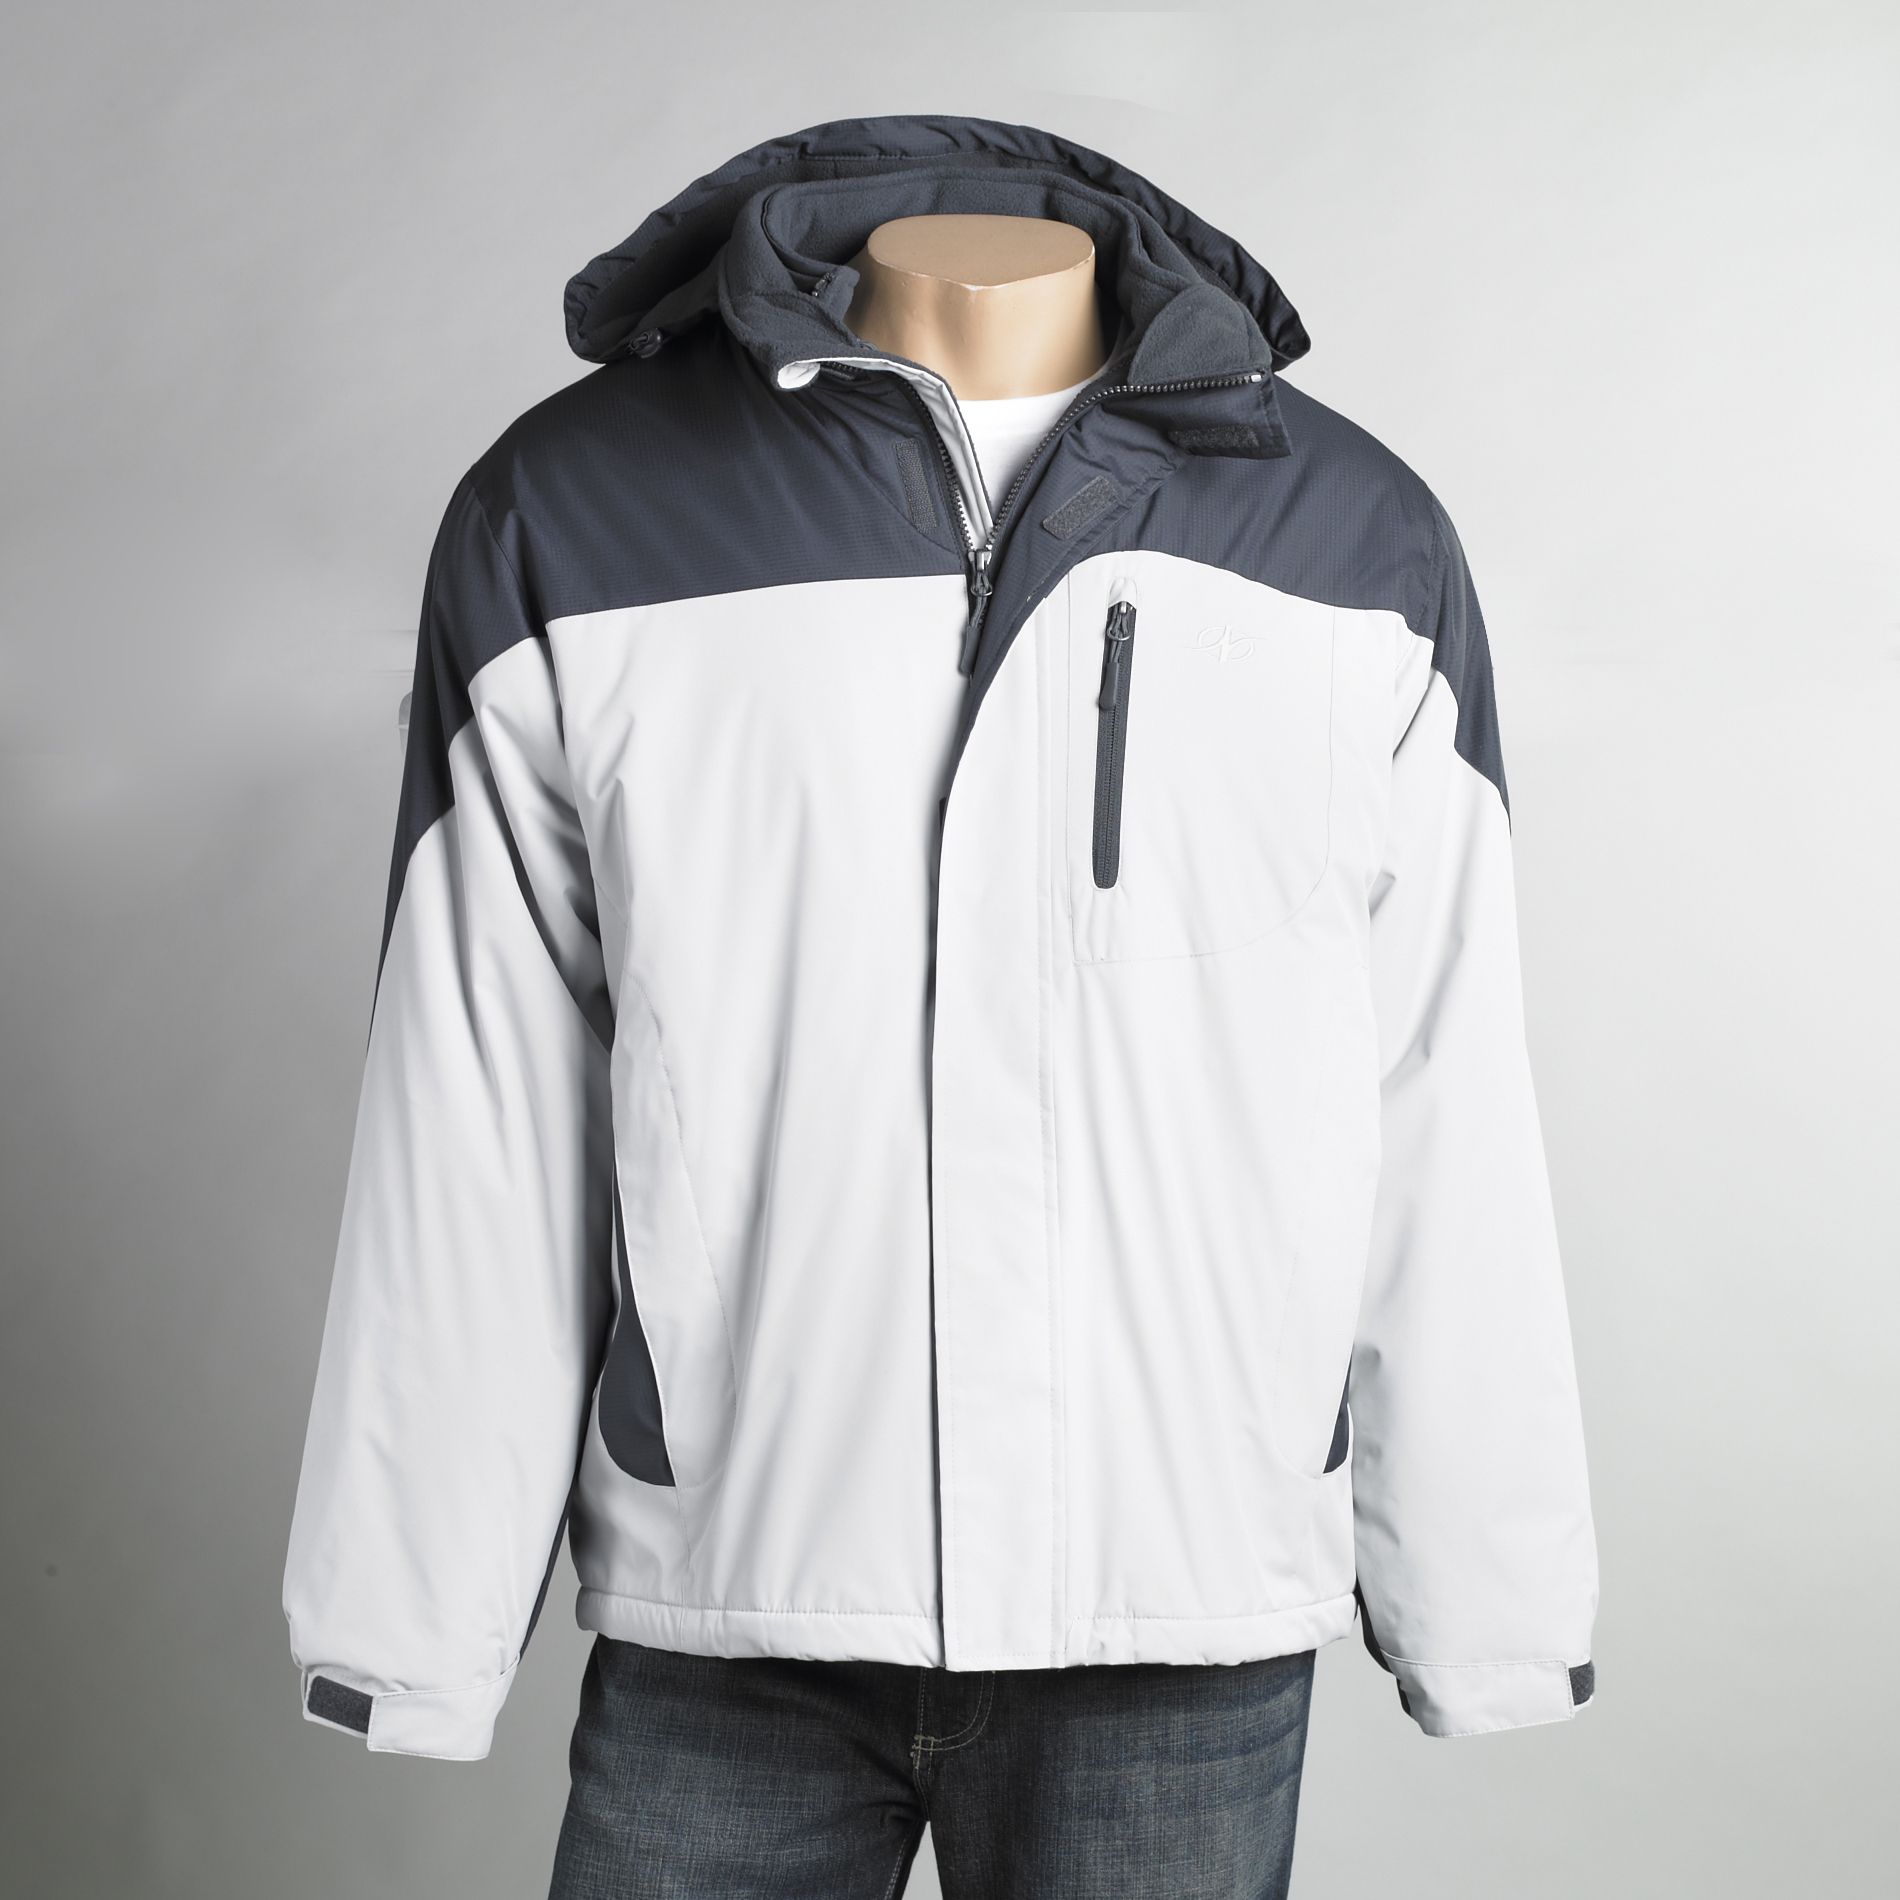 NordicTrack Men&#39;s 3-in-1 Systems Jacket